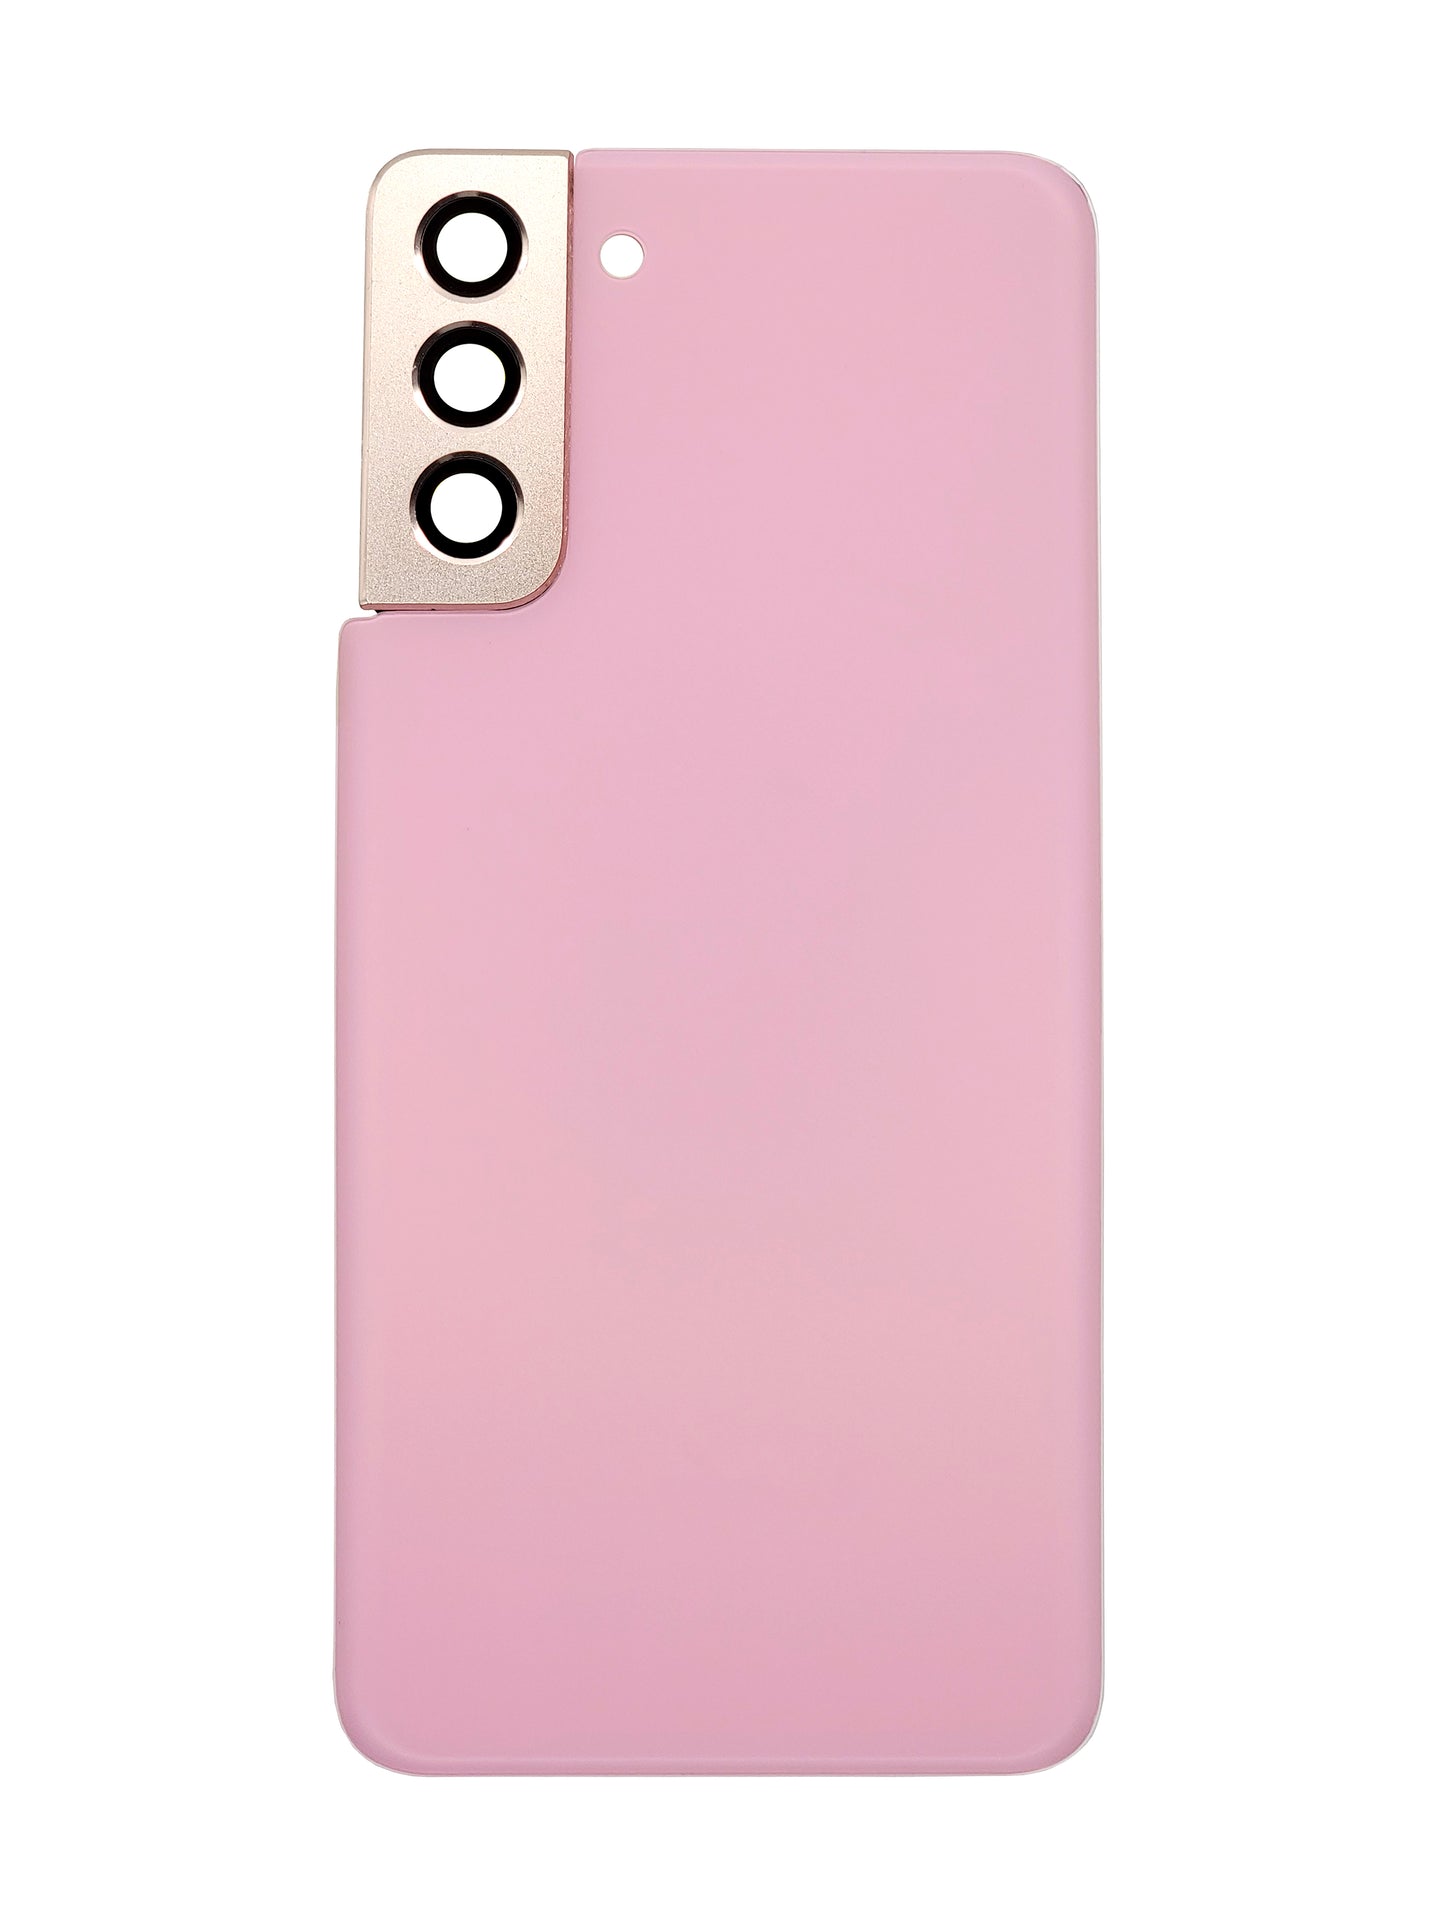 SGS S21 Plus Back Cover (Pink)